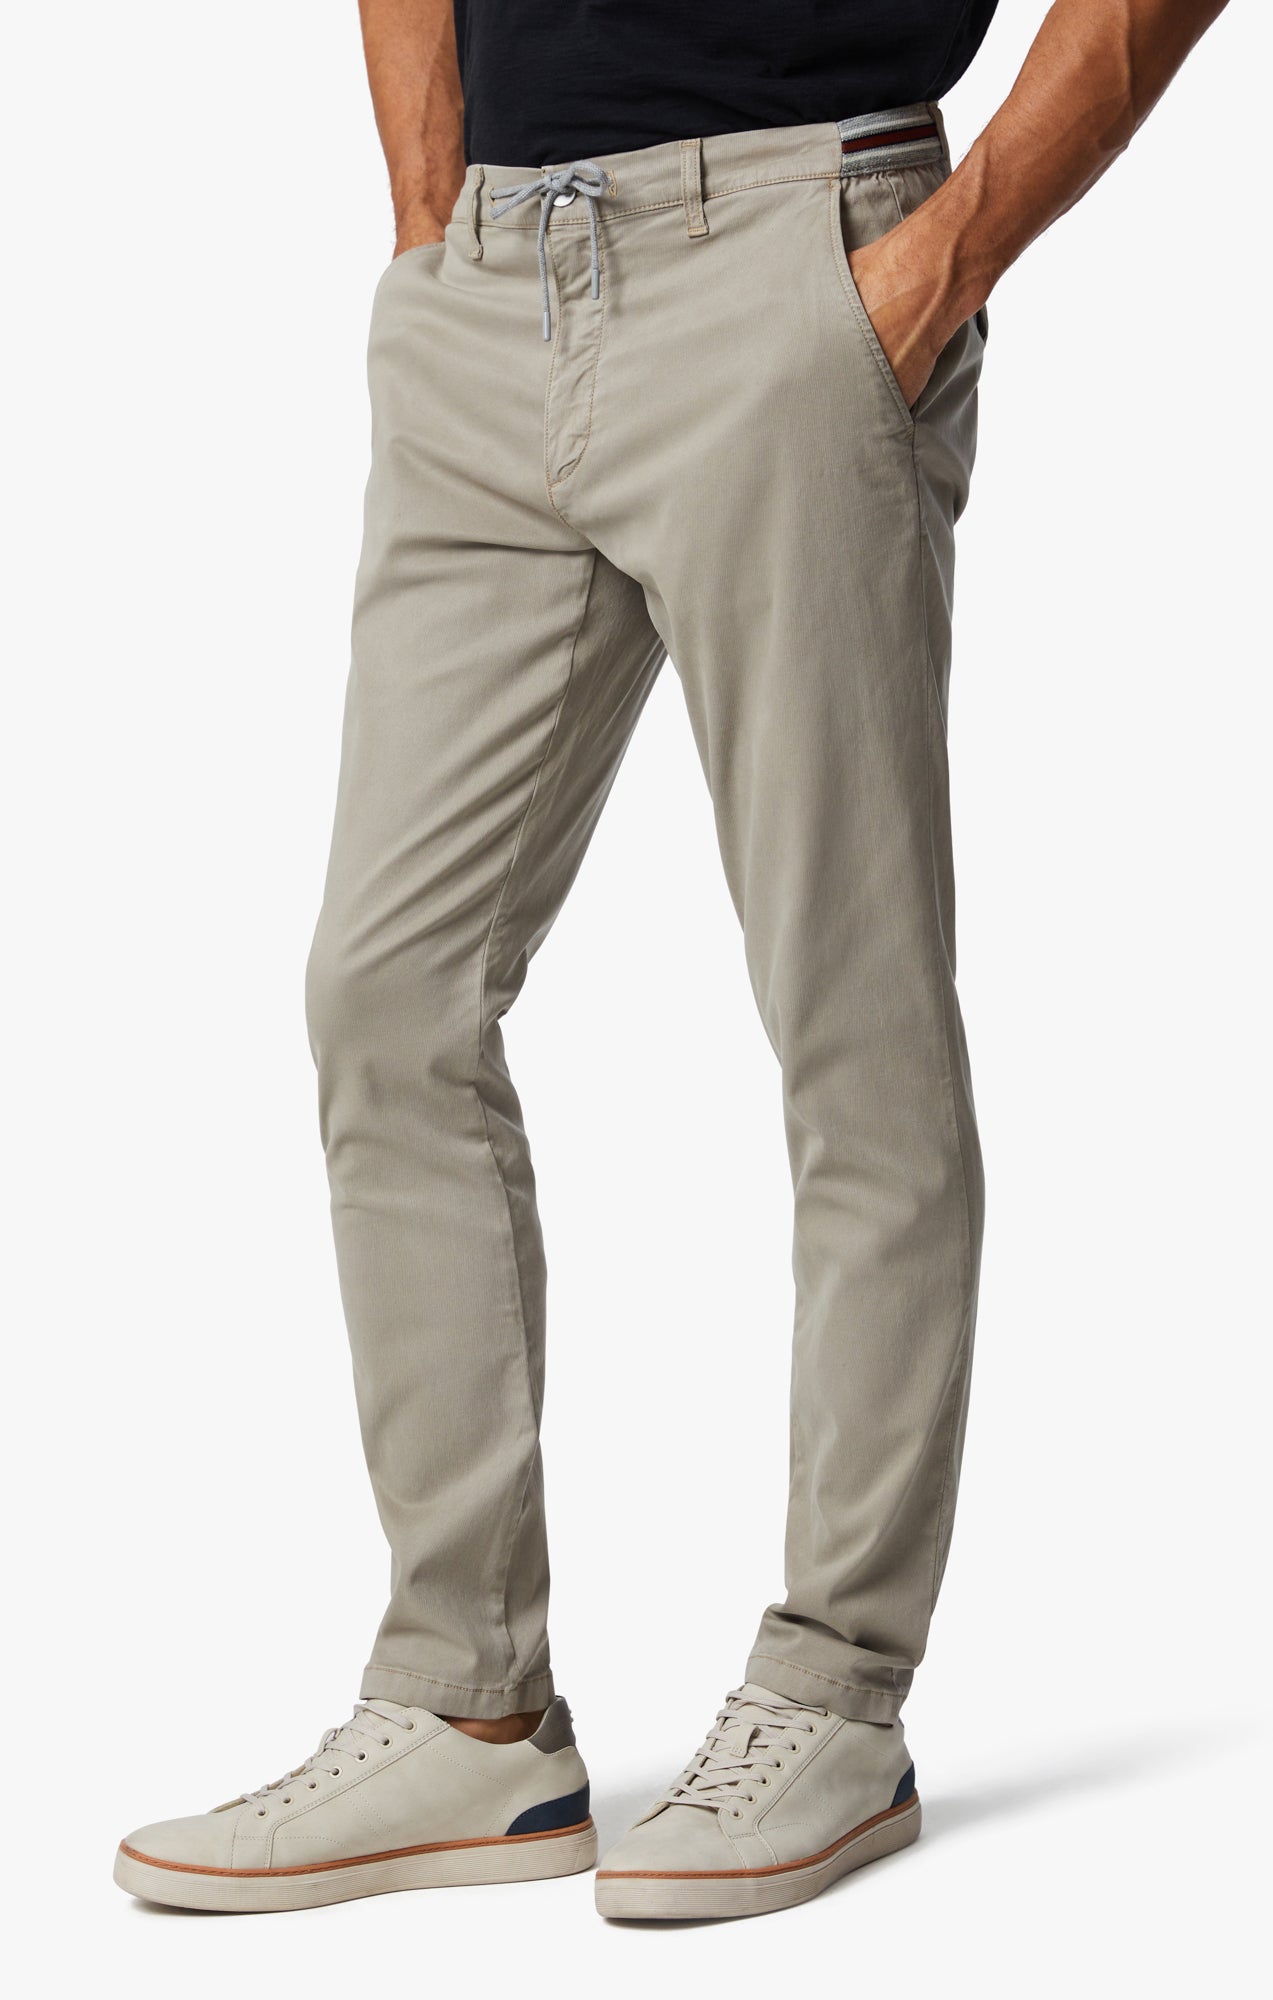 Formia Drawstring Chino Pants In Aluminum Soft Touch Image 3